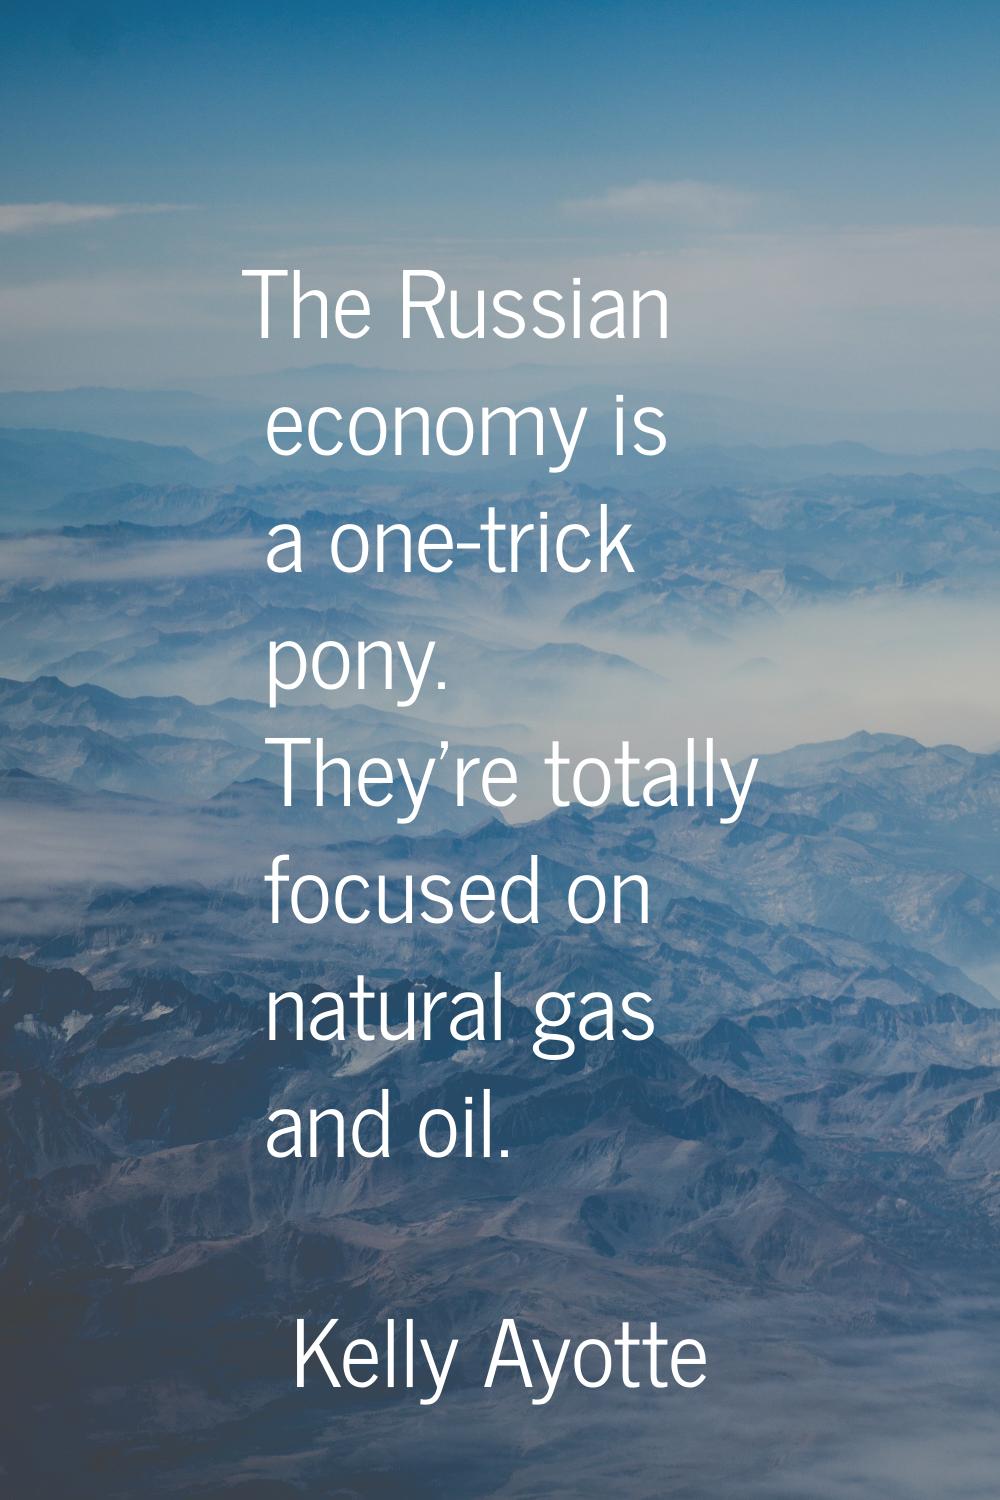 The Russian economy is a one-trick pony. They're totally focused on natural gas and oil.